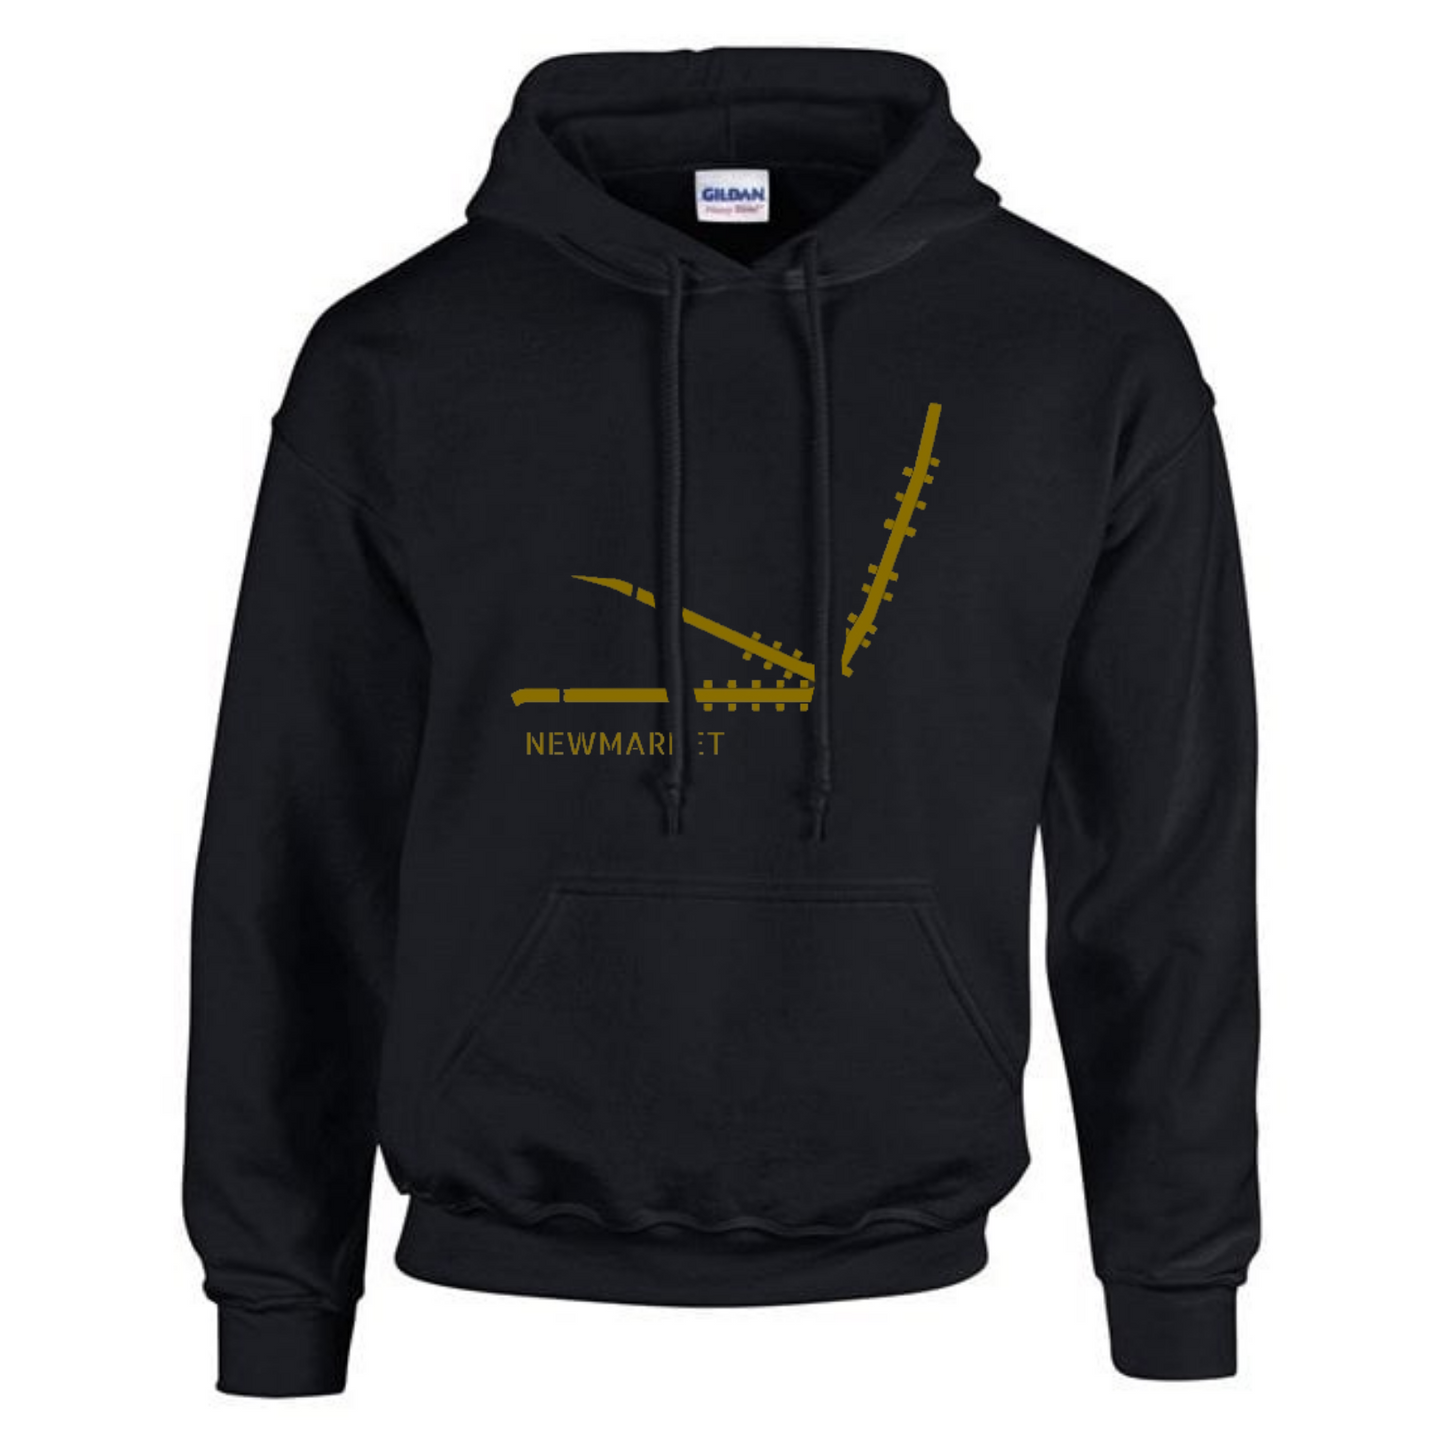 Newmarket Course Map Hoodie